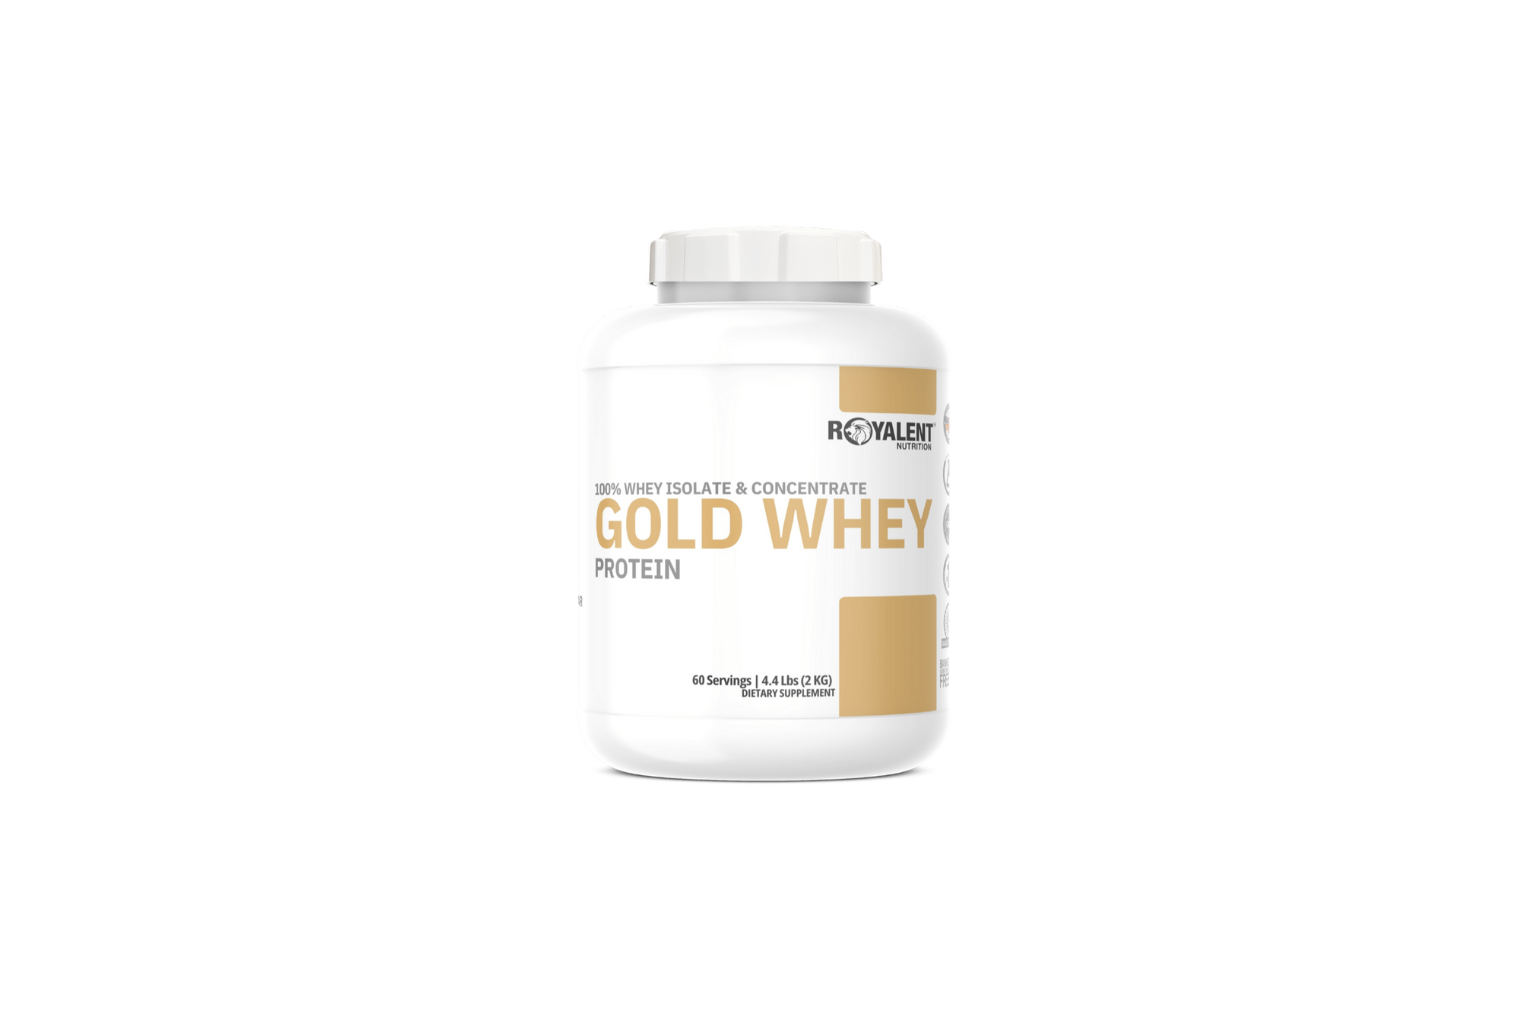 Gold whey